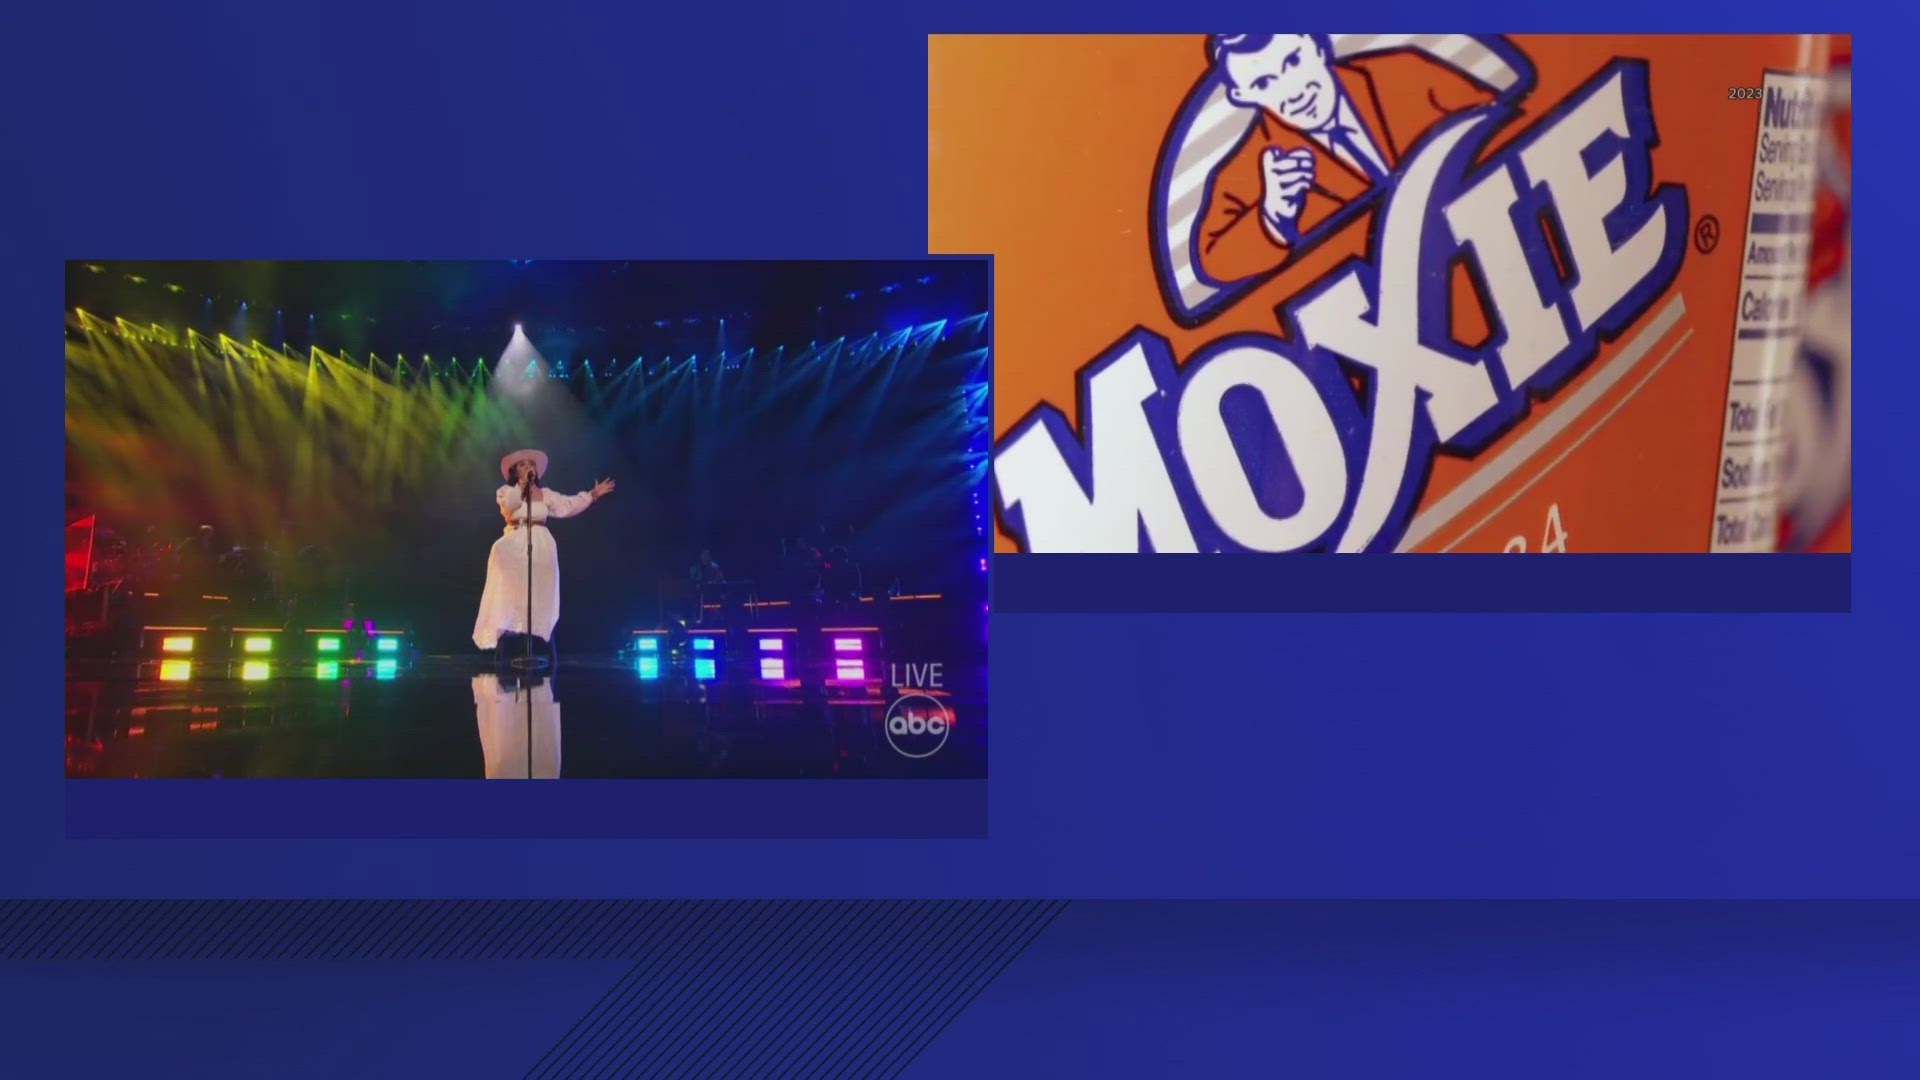 Gagnon showed off her own moxie recently on "American Idol." She made it to the top five before being eliminated.